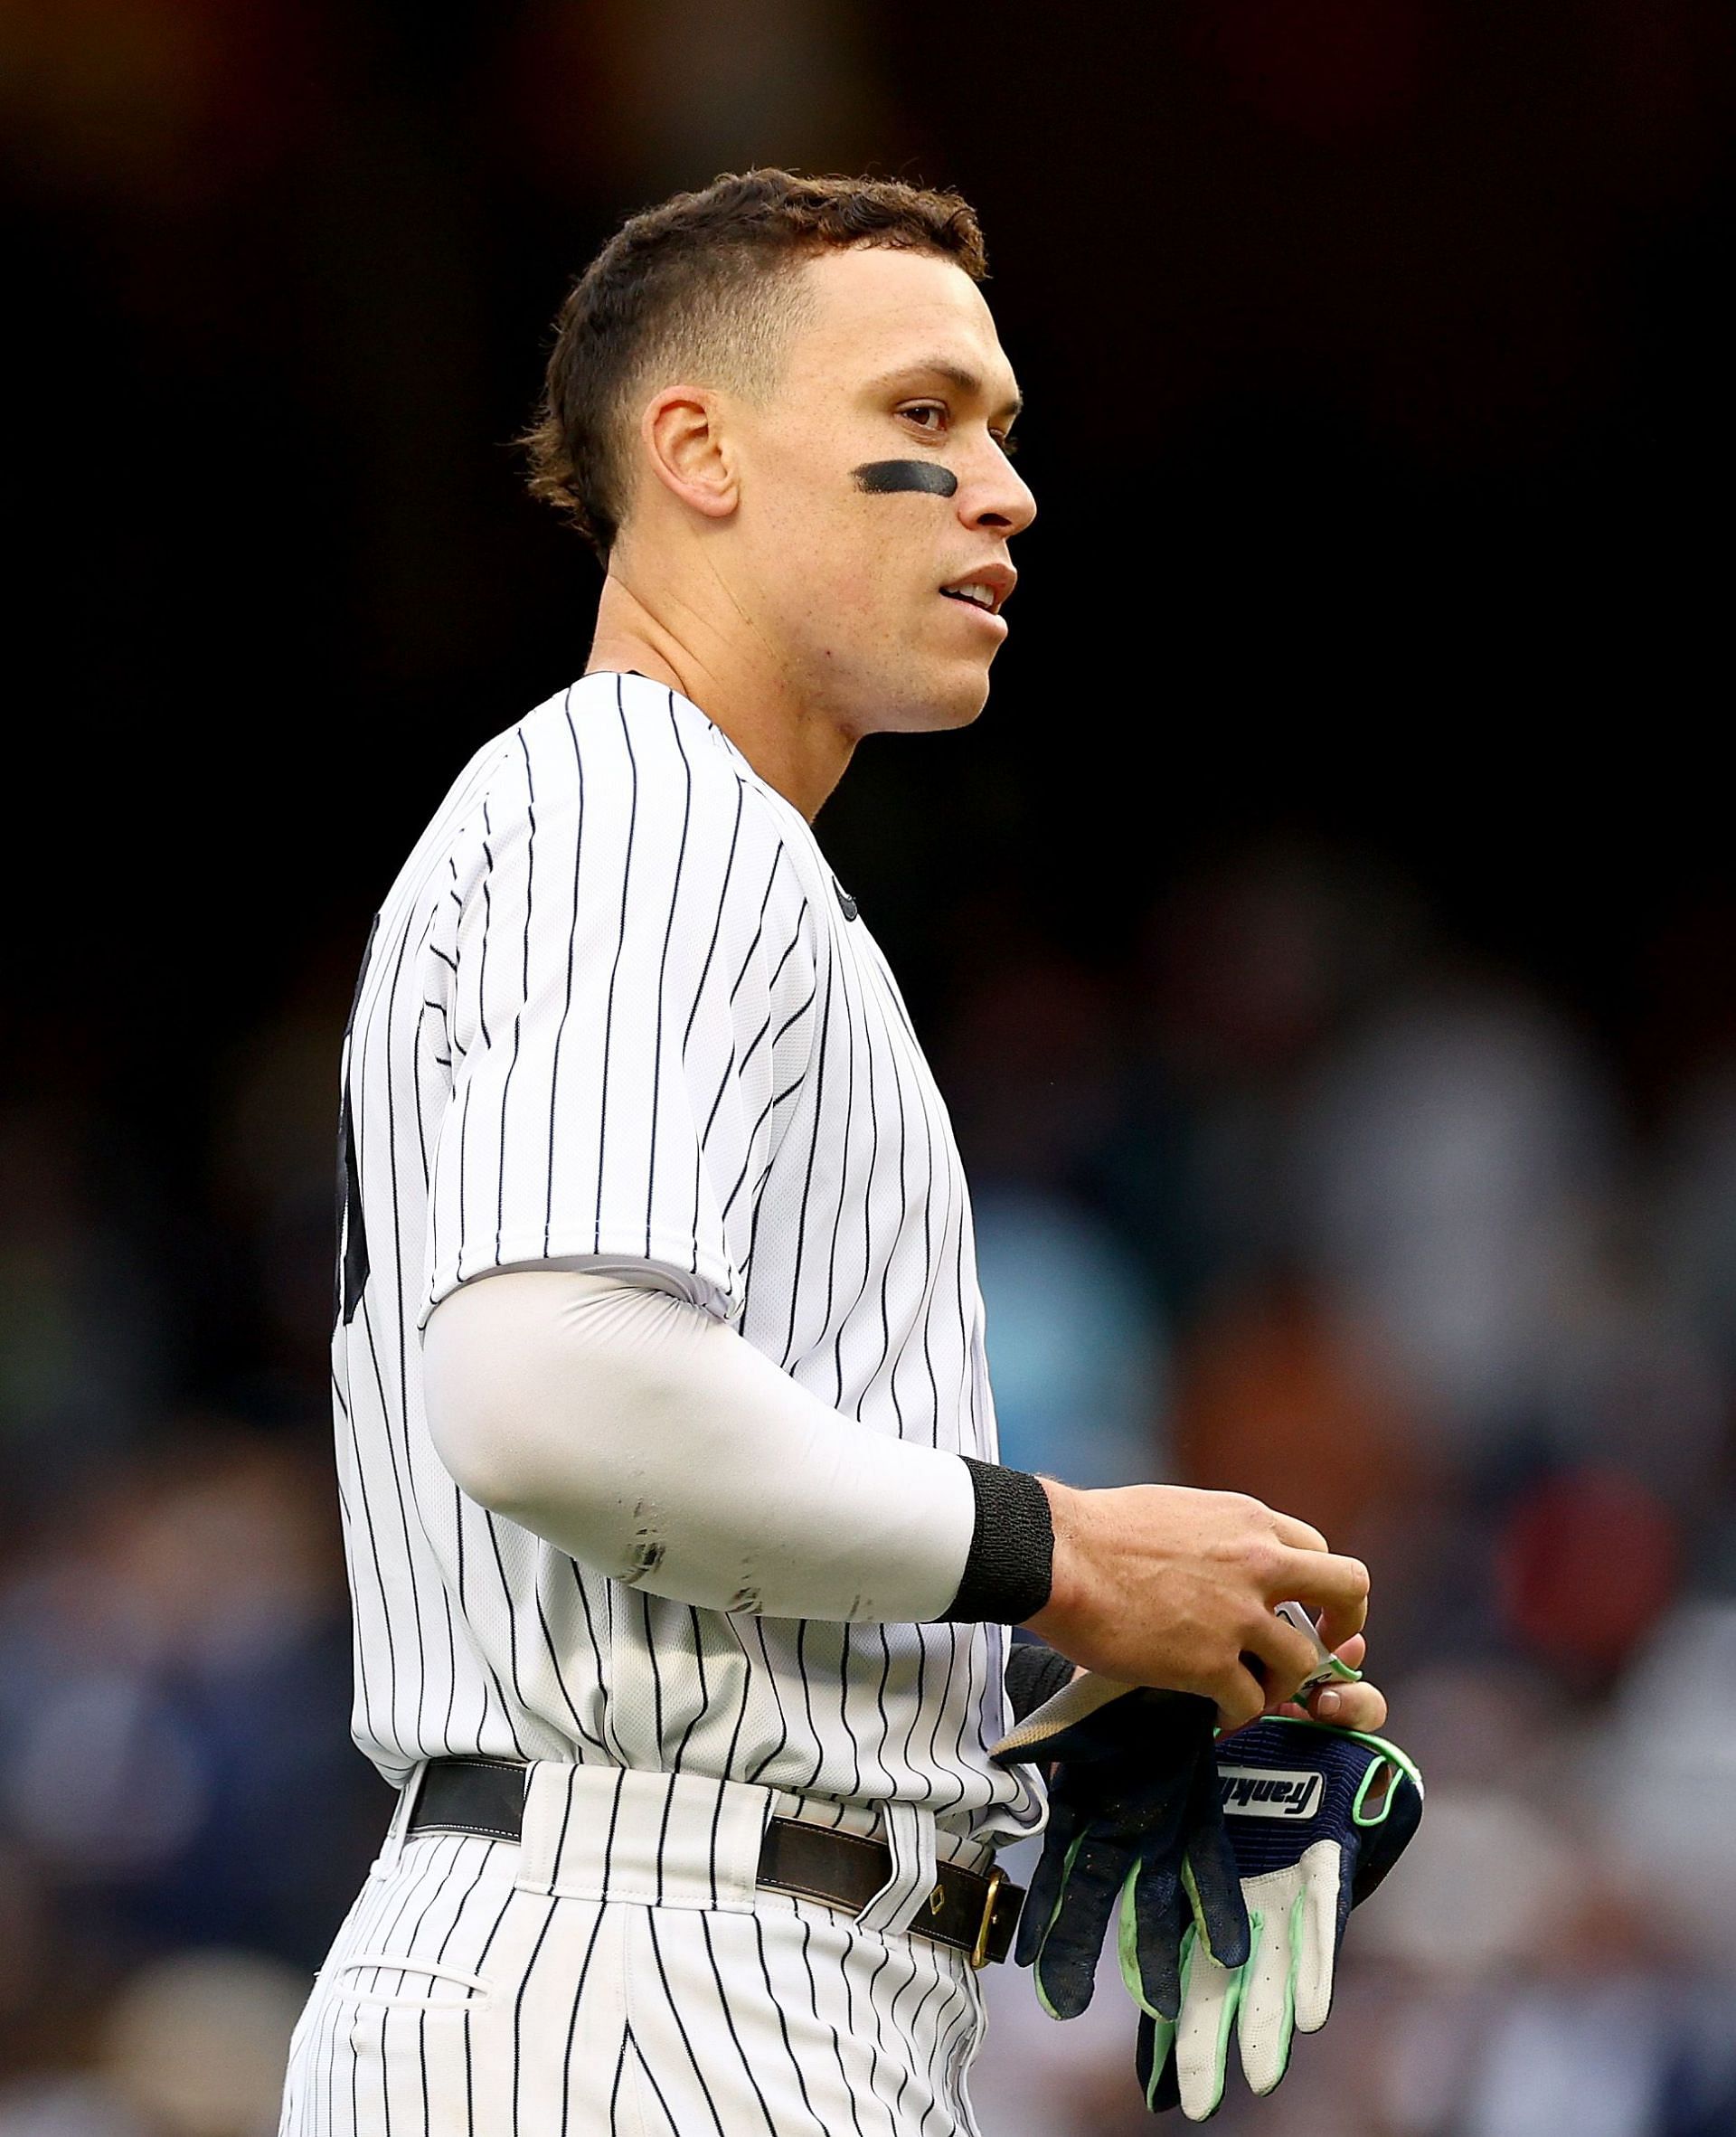 Aaron Judge has been impressive since signing for the Yankees in 2016